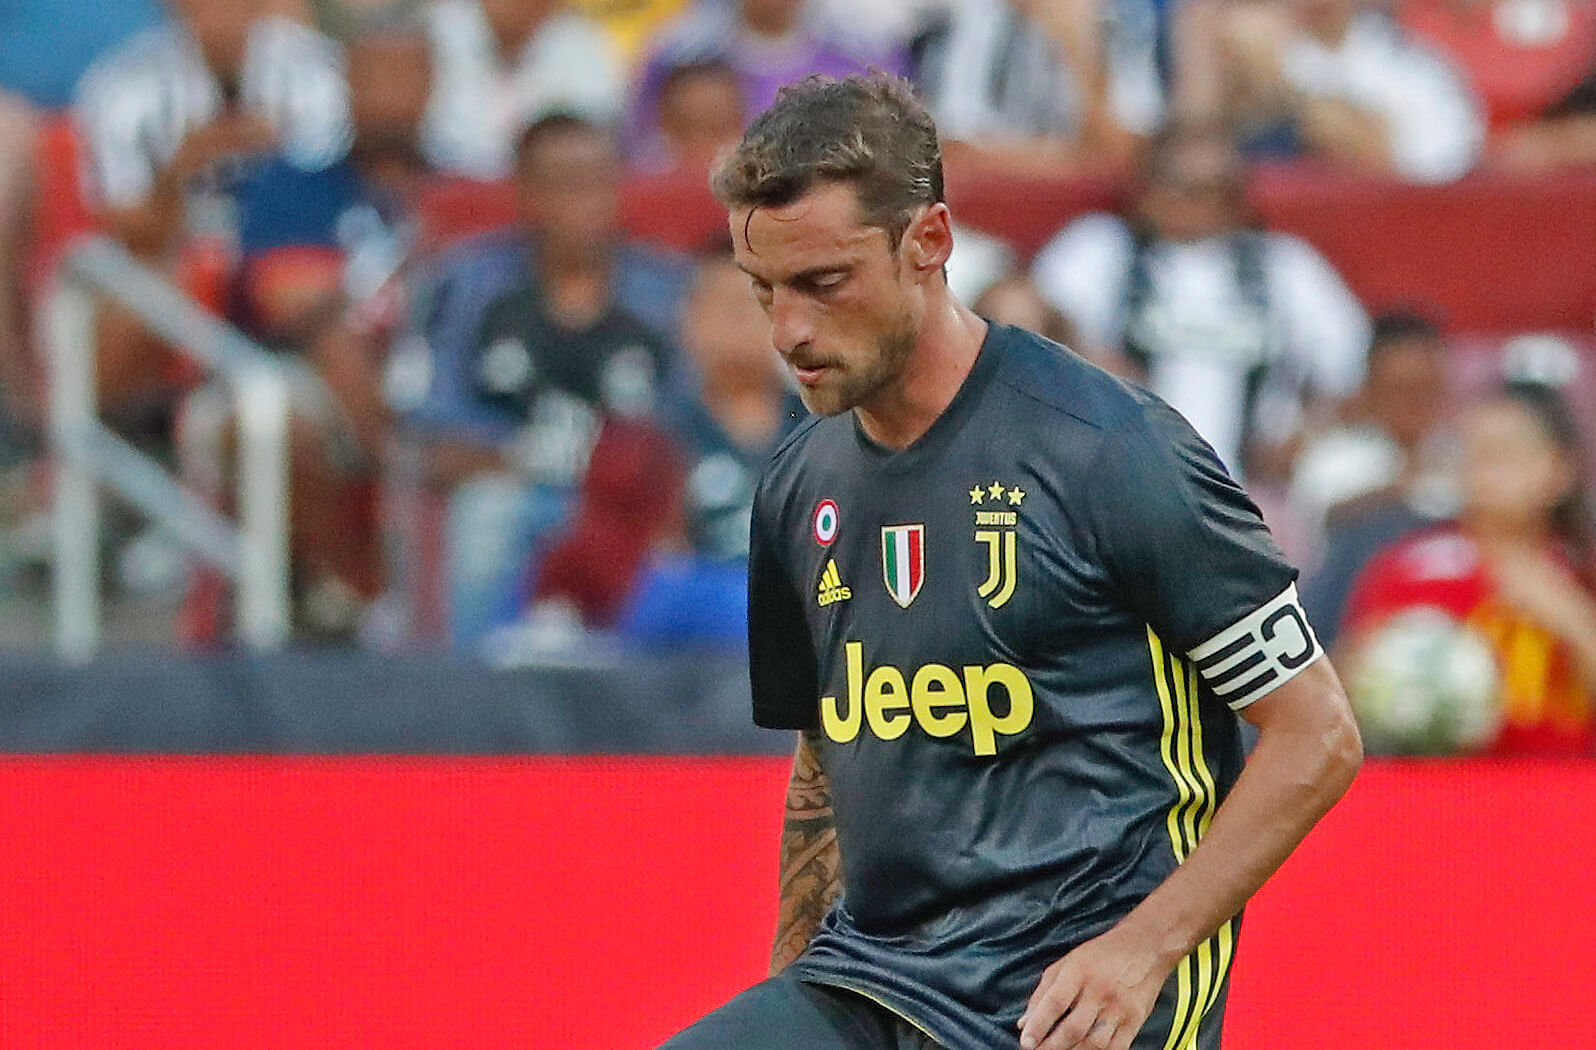 Villarreal vs Juventus Preview: How to Watch, Team News & Prediction